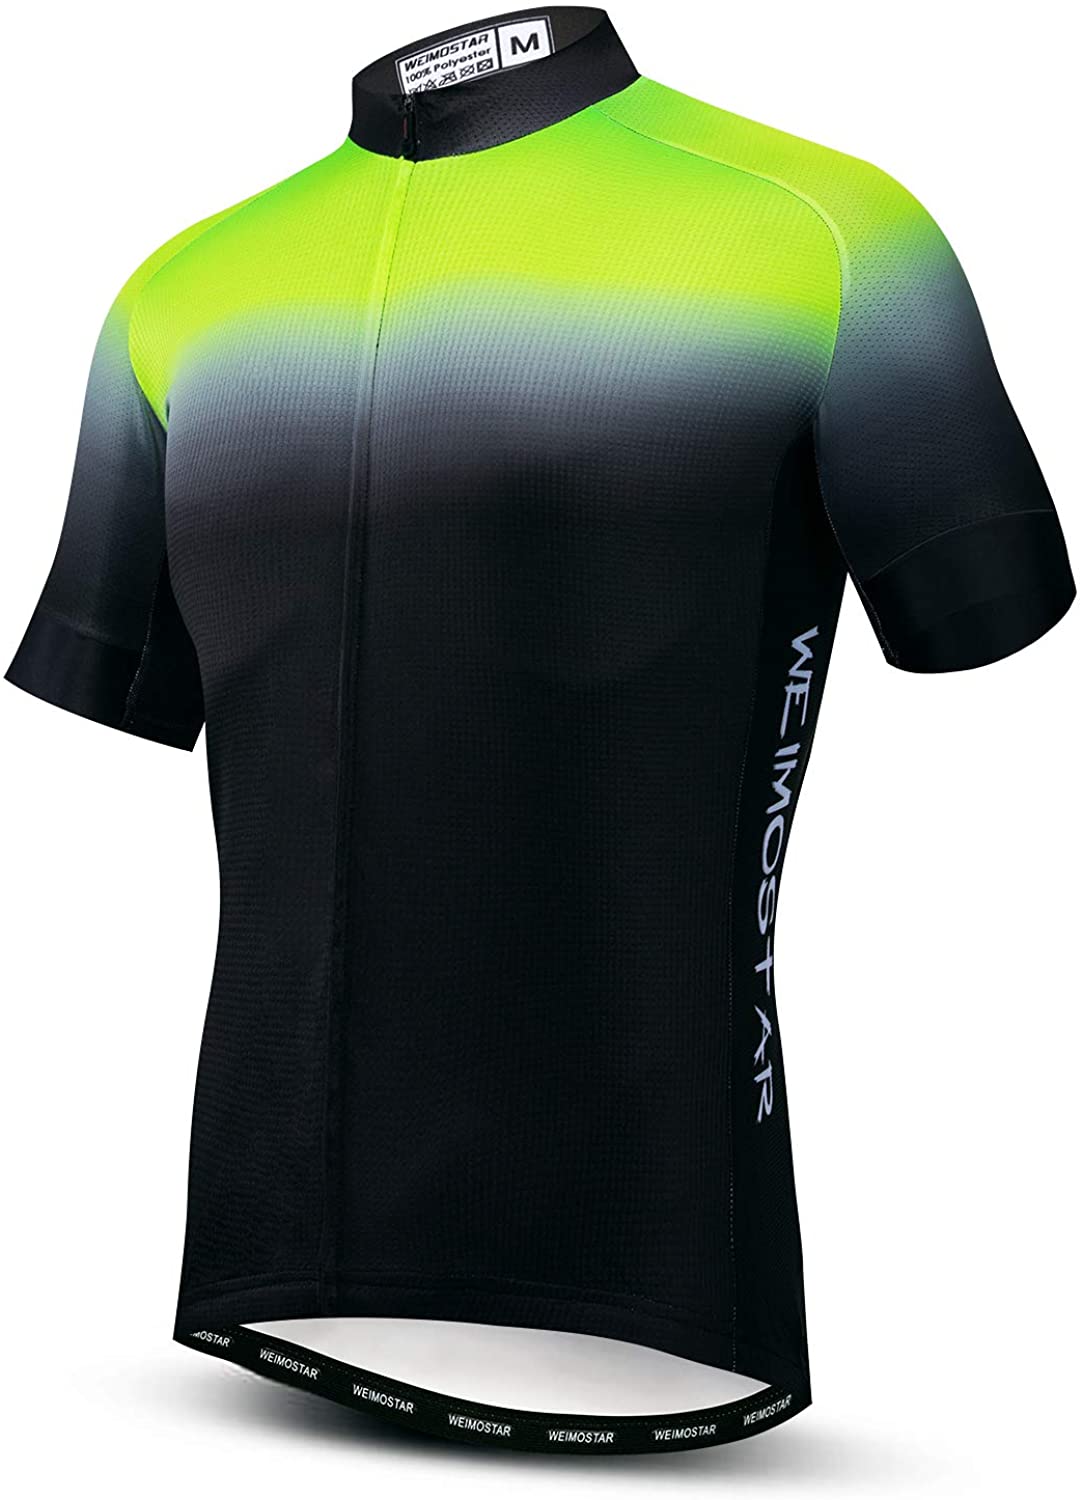 JPOJPO Mens Cycling Jersey Bicycle Short Sleeved Bicycle Jacket with Pockets